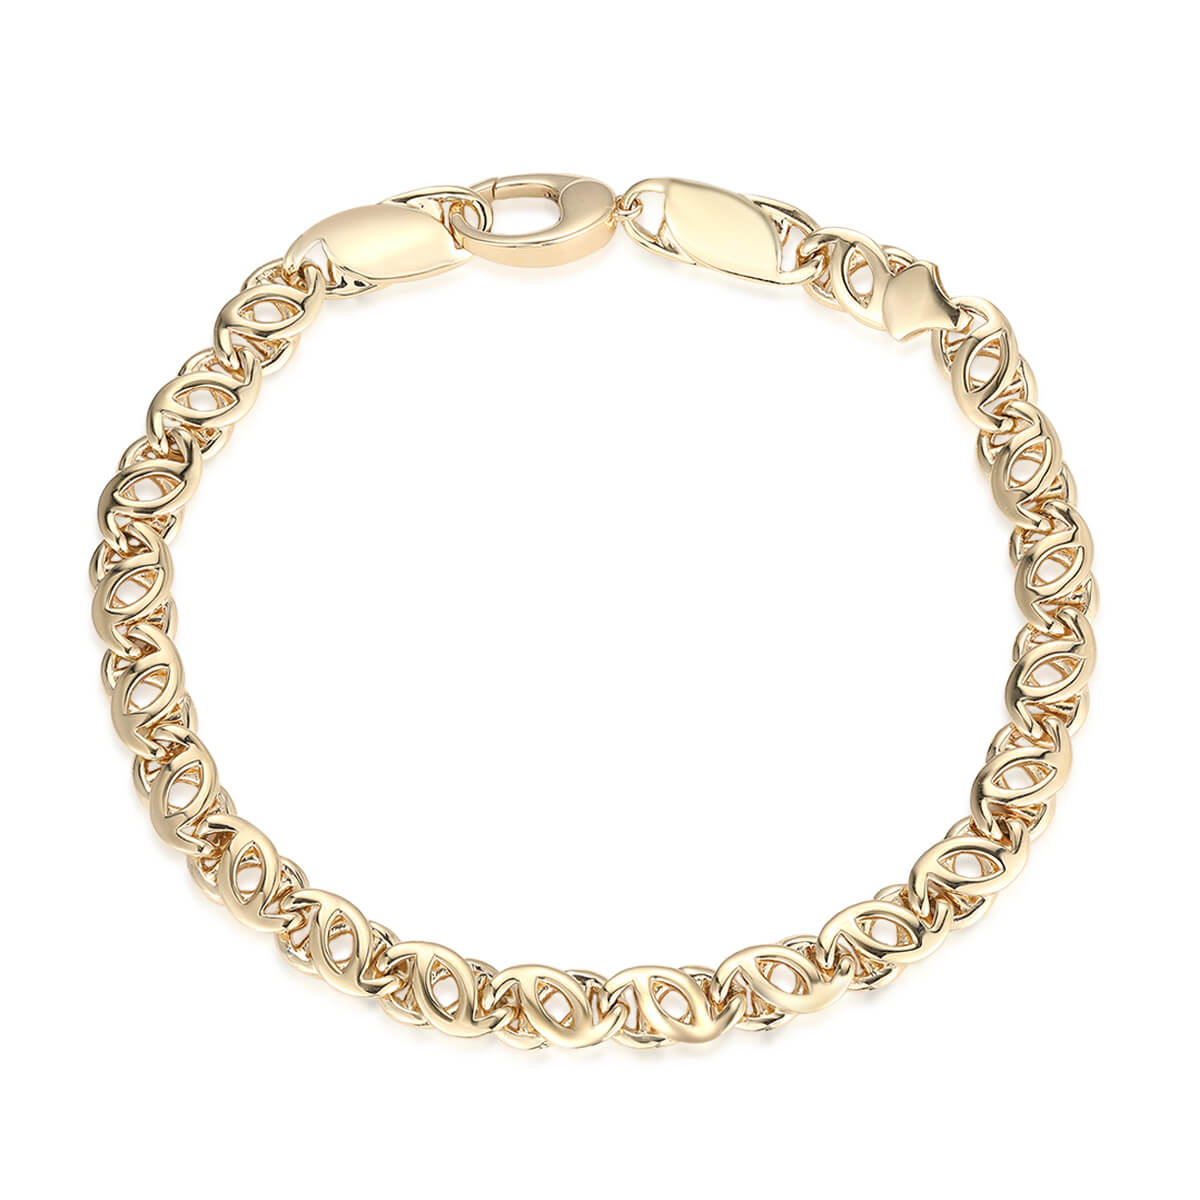 Gucci Blondie bracelet in gold-toned metal | GUCCI® US